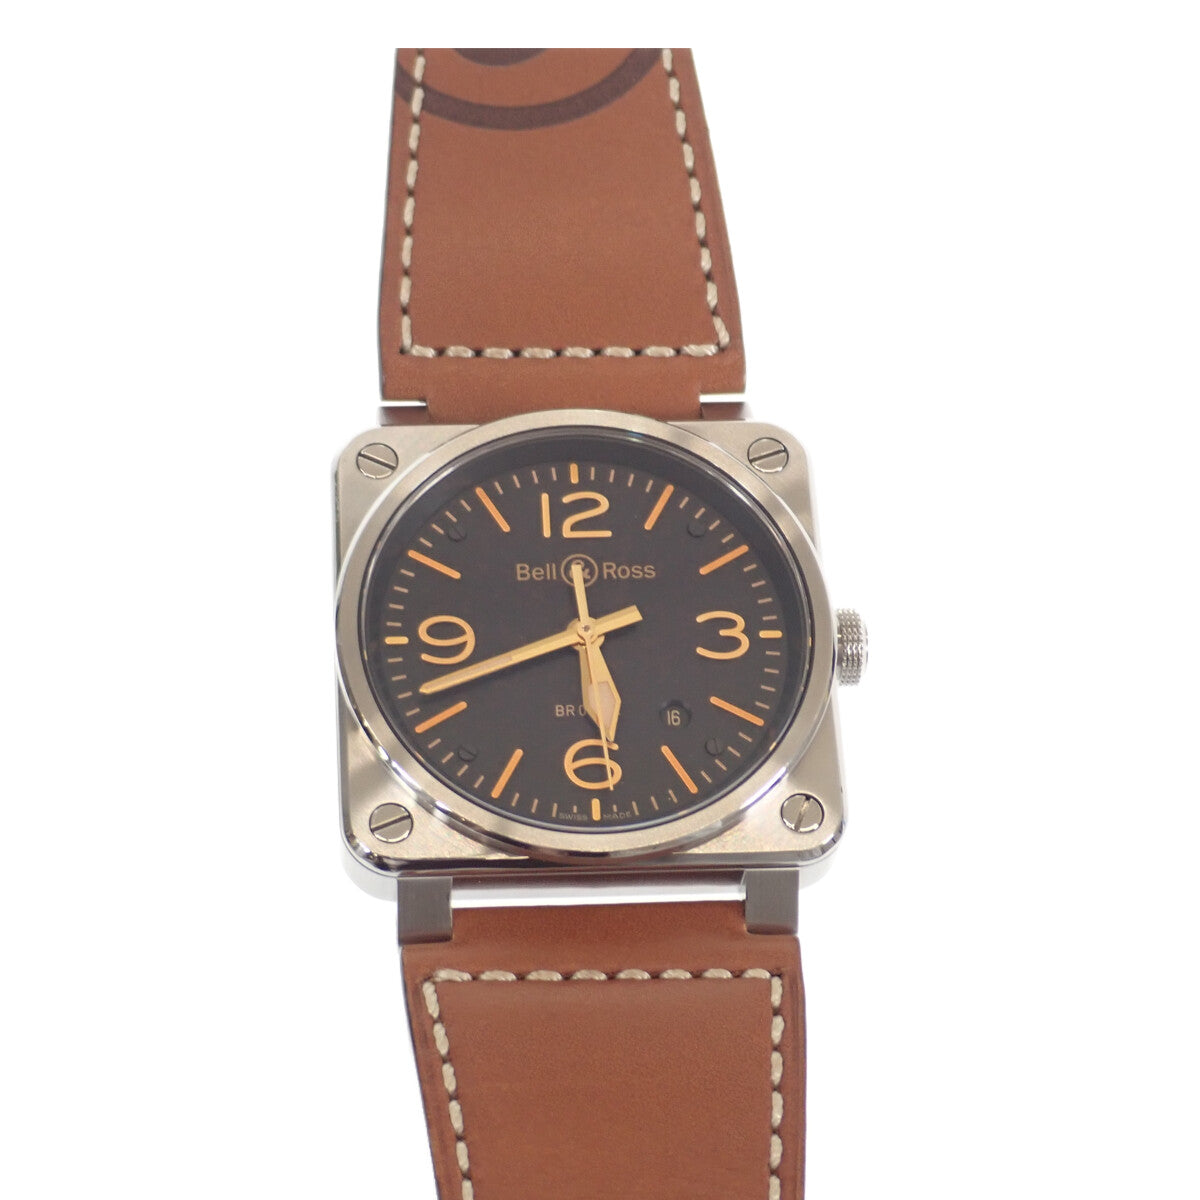 Other  Bell & Ross Golden Heritage Men's Watch with Stainless Steel Case and Black Leather Strap  BR03-92GOLDENHERI-CA in Excellent condition